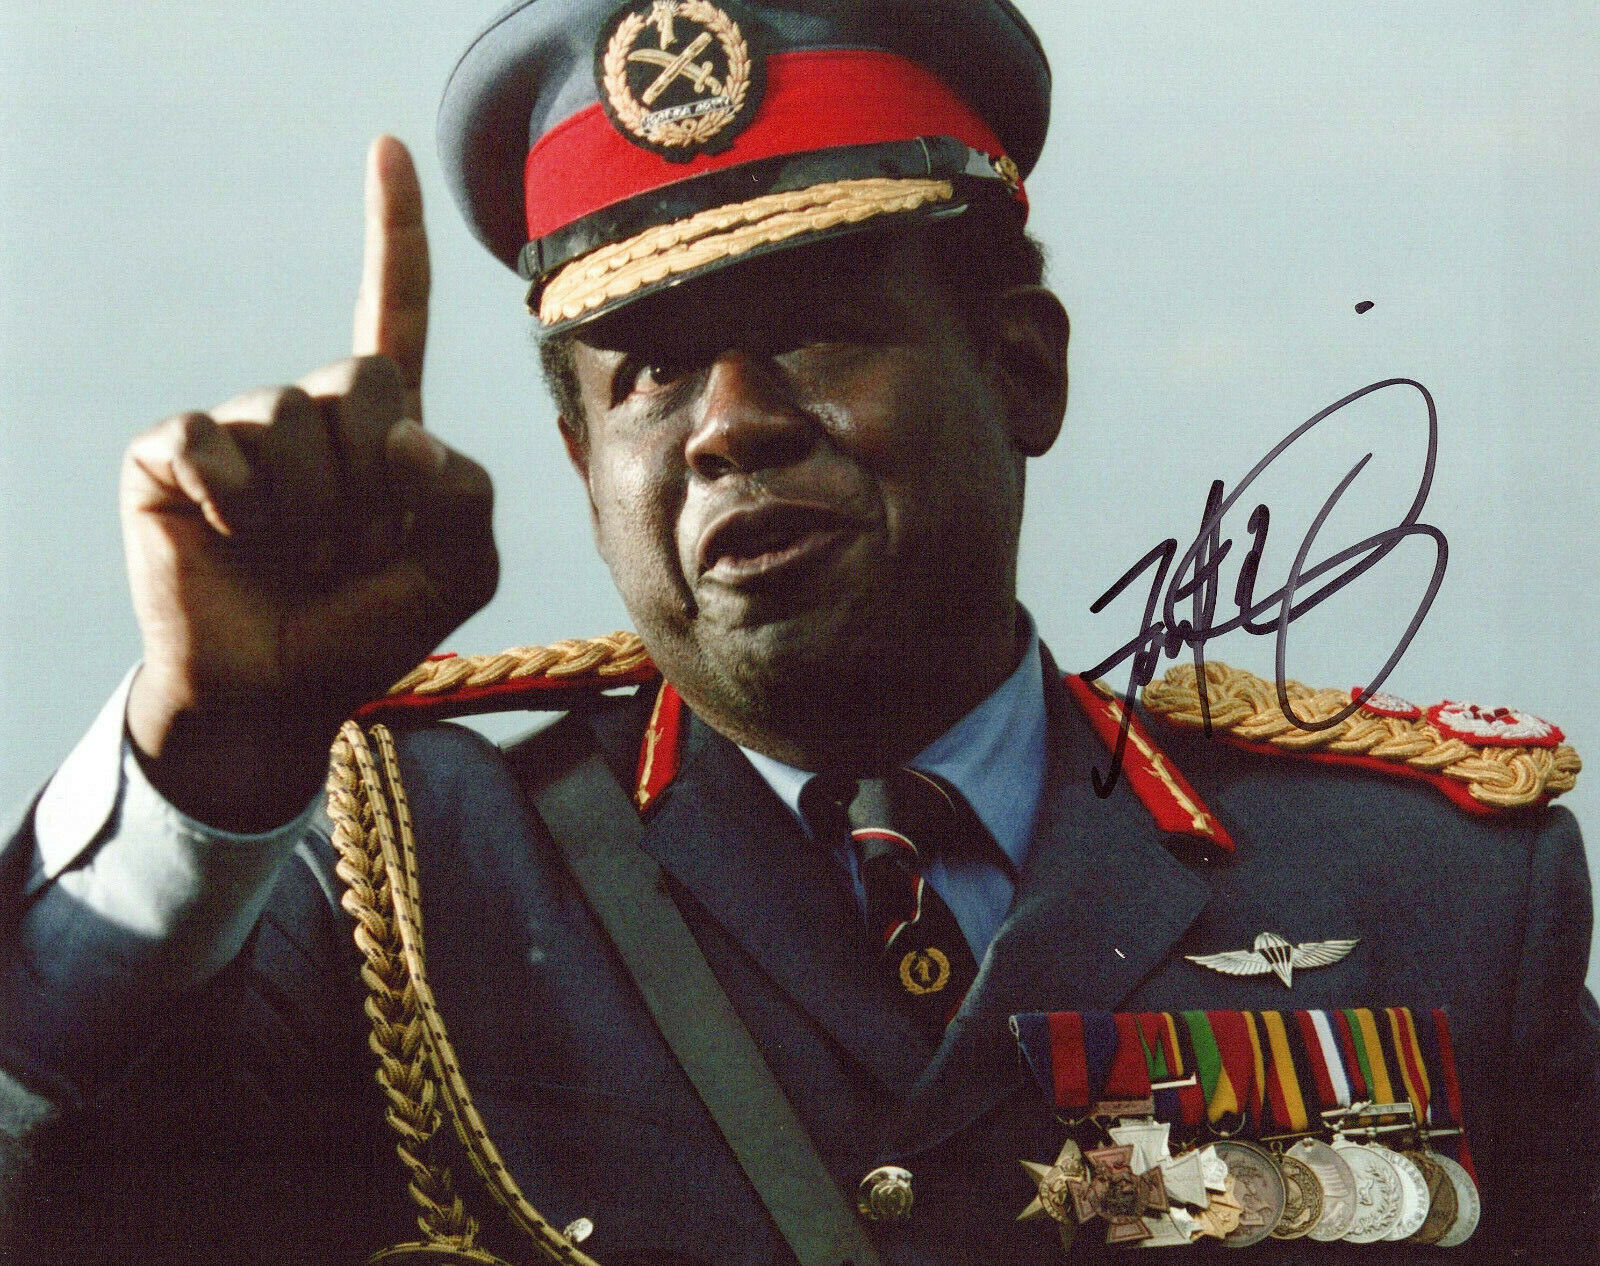 Forest Whitaker The Last King Of Scotland autographed Photo Poster painting signed 8x10 #2 Idi